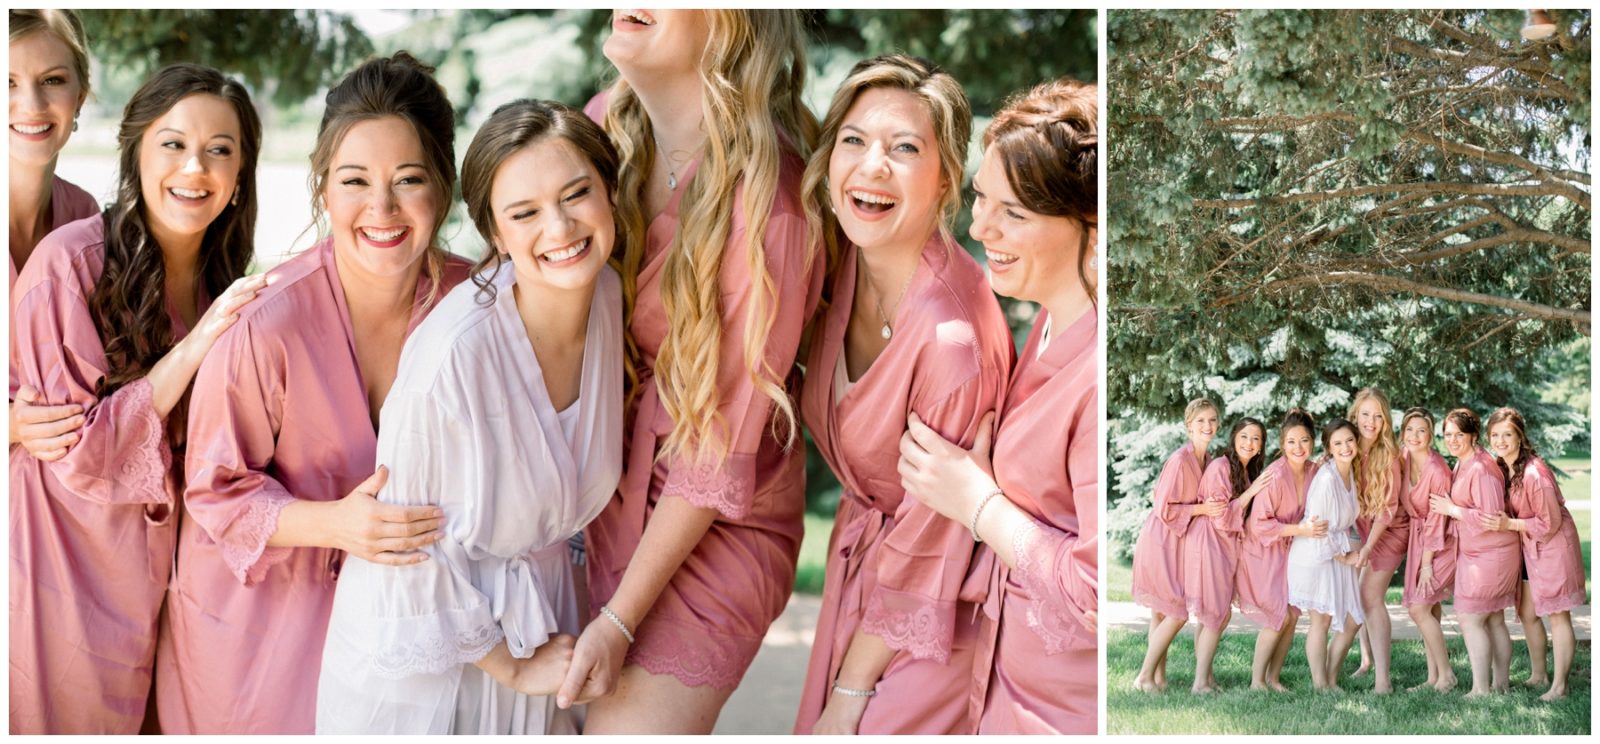 Two photos, side by side, of a bride and her bridesmaids. They are all together and laughing. She's wering white and they are wearing pink.